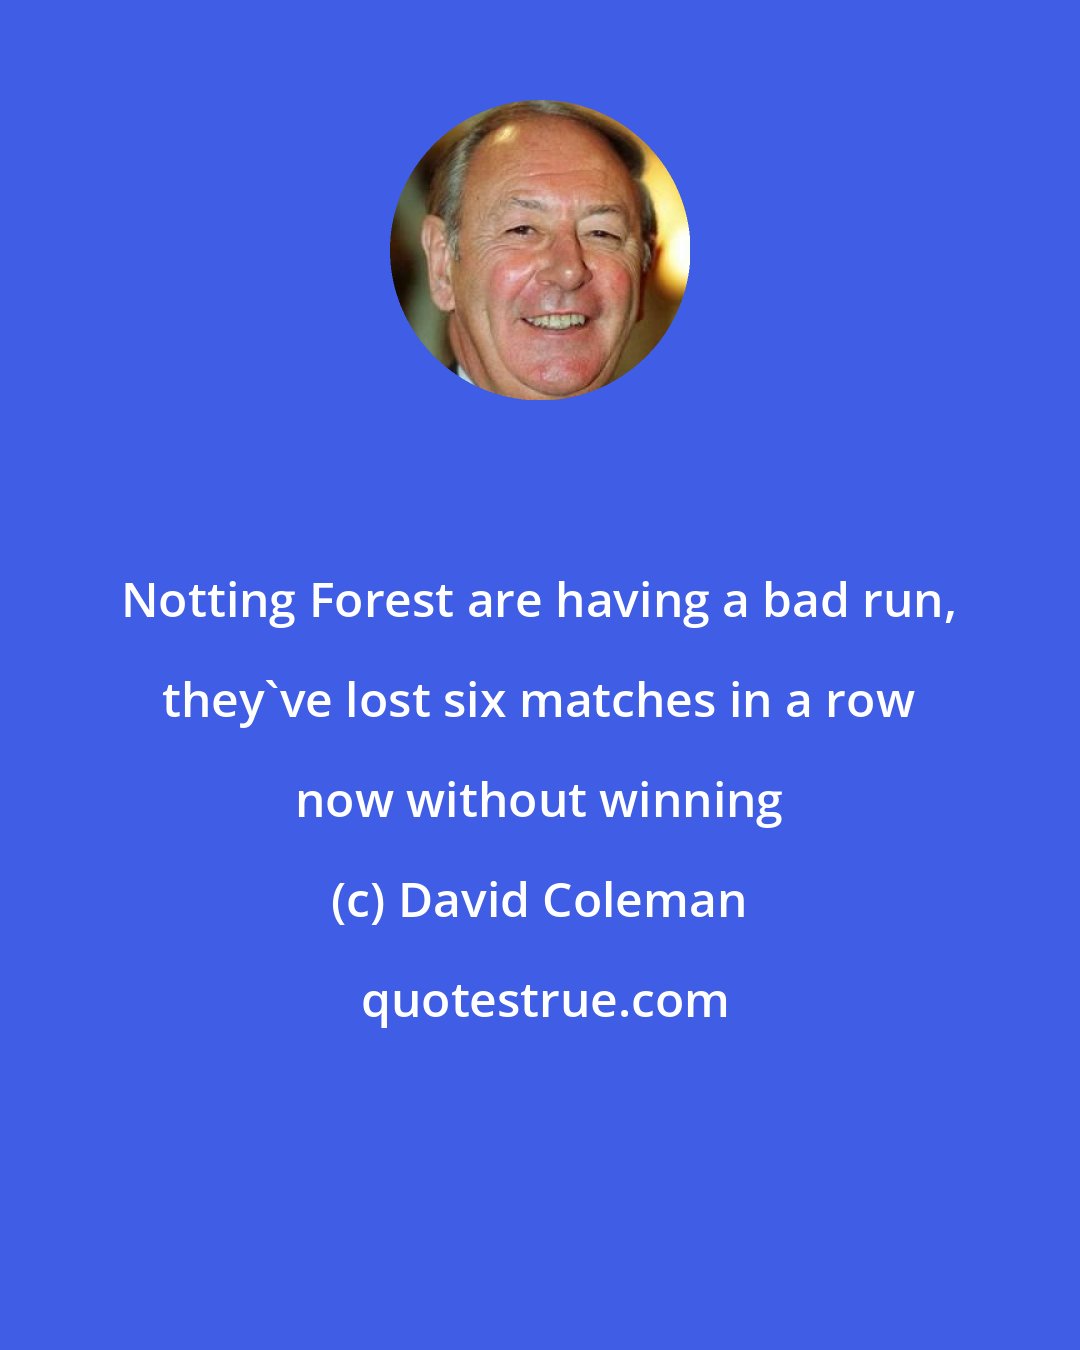 David Coleman: Notting Forest are having a bad run, they've lost six matches in a row now without winning